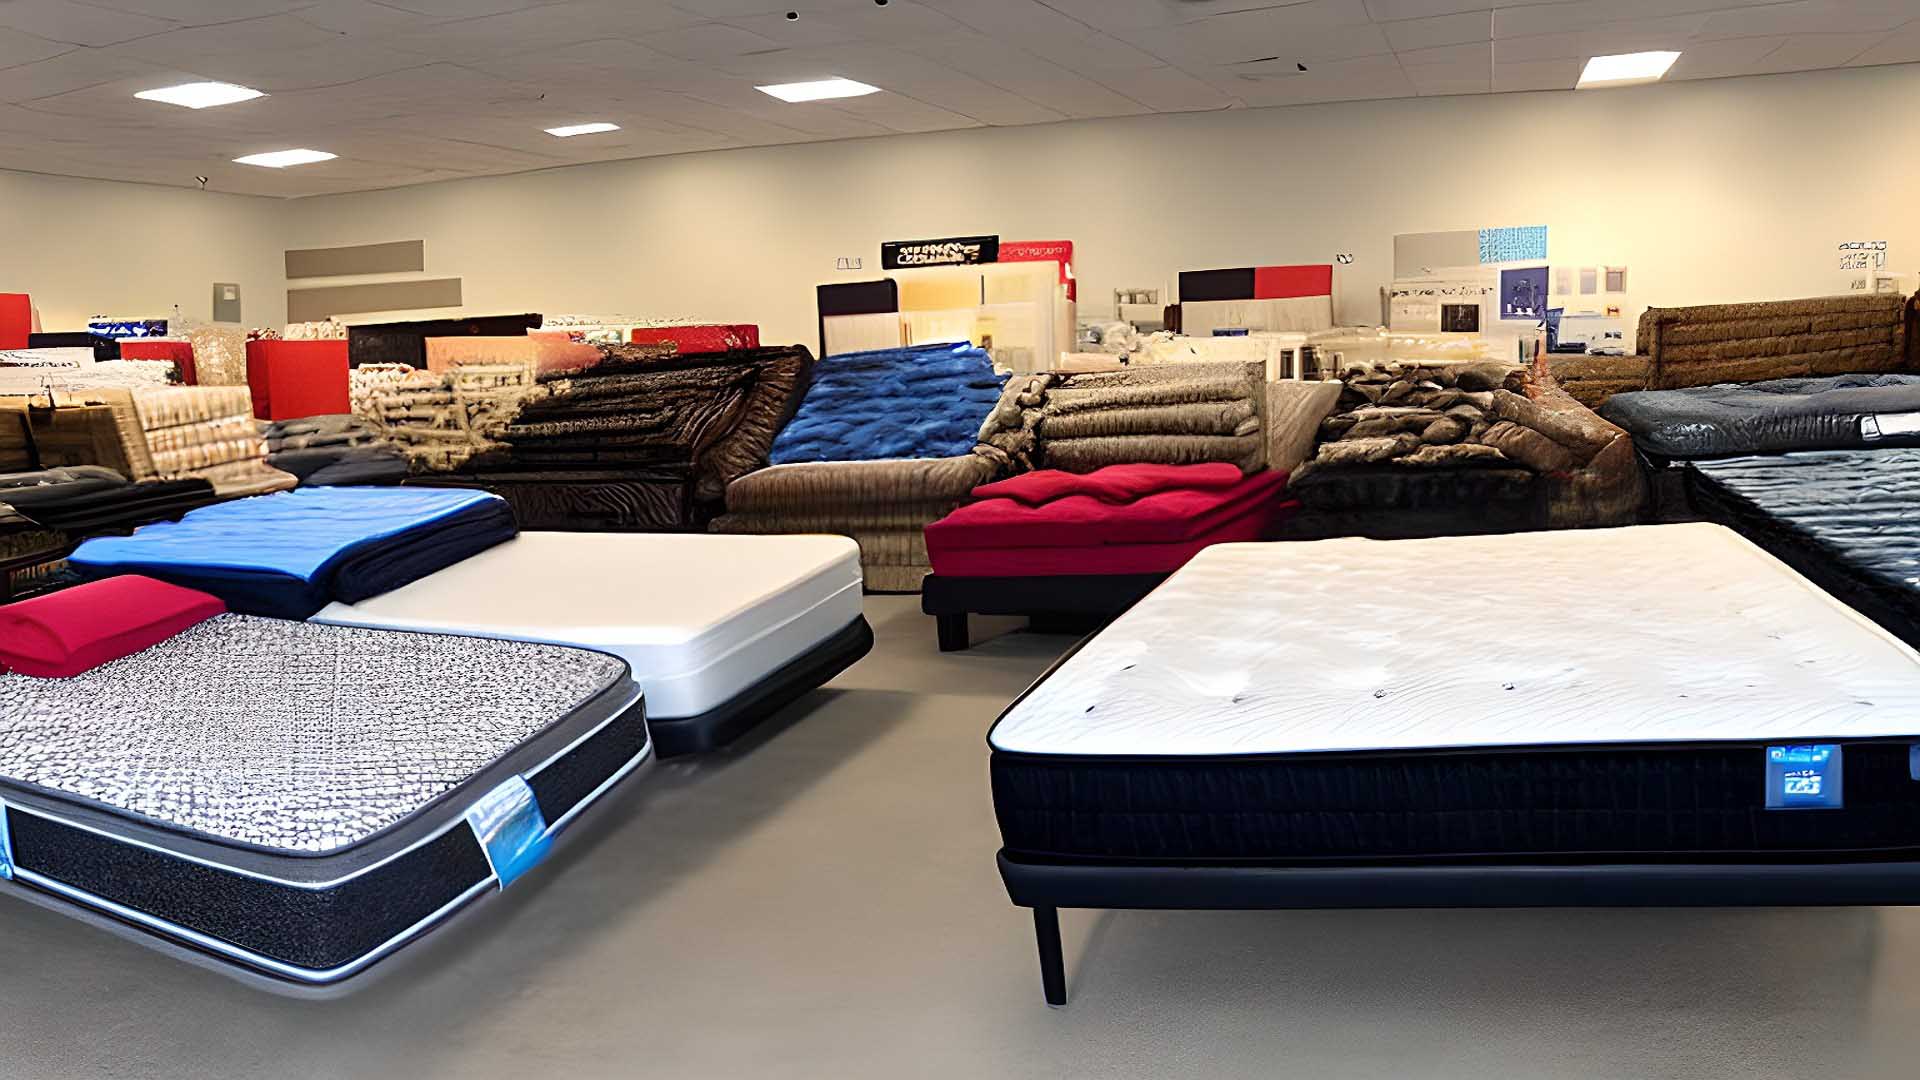 Mattress Sales & Deals in Brentwood, NY